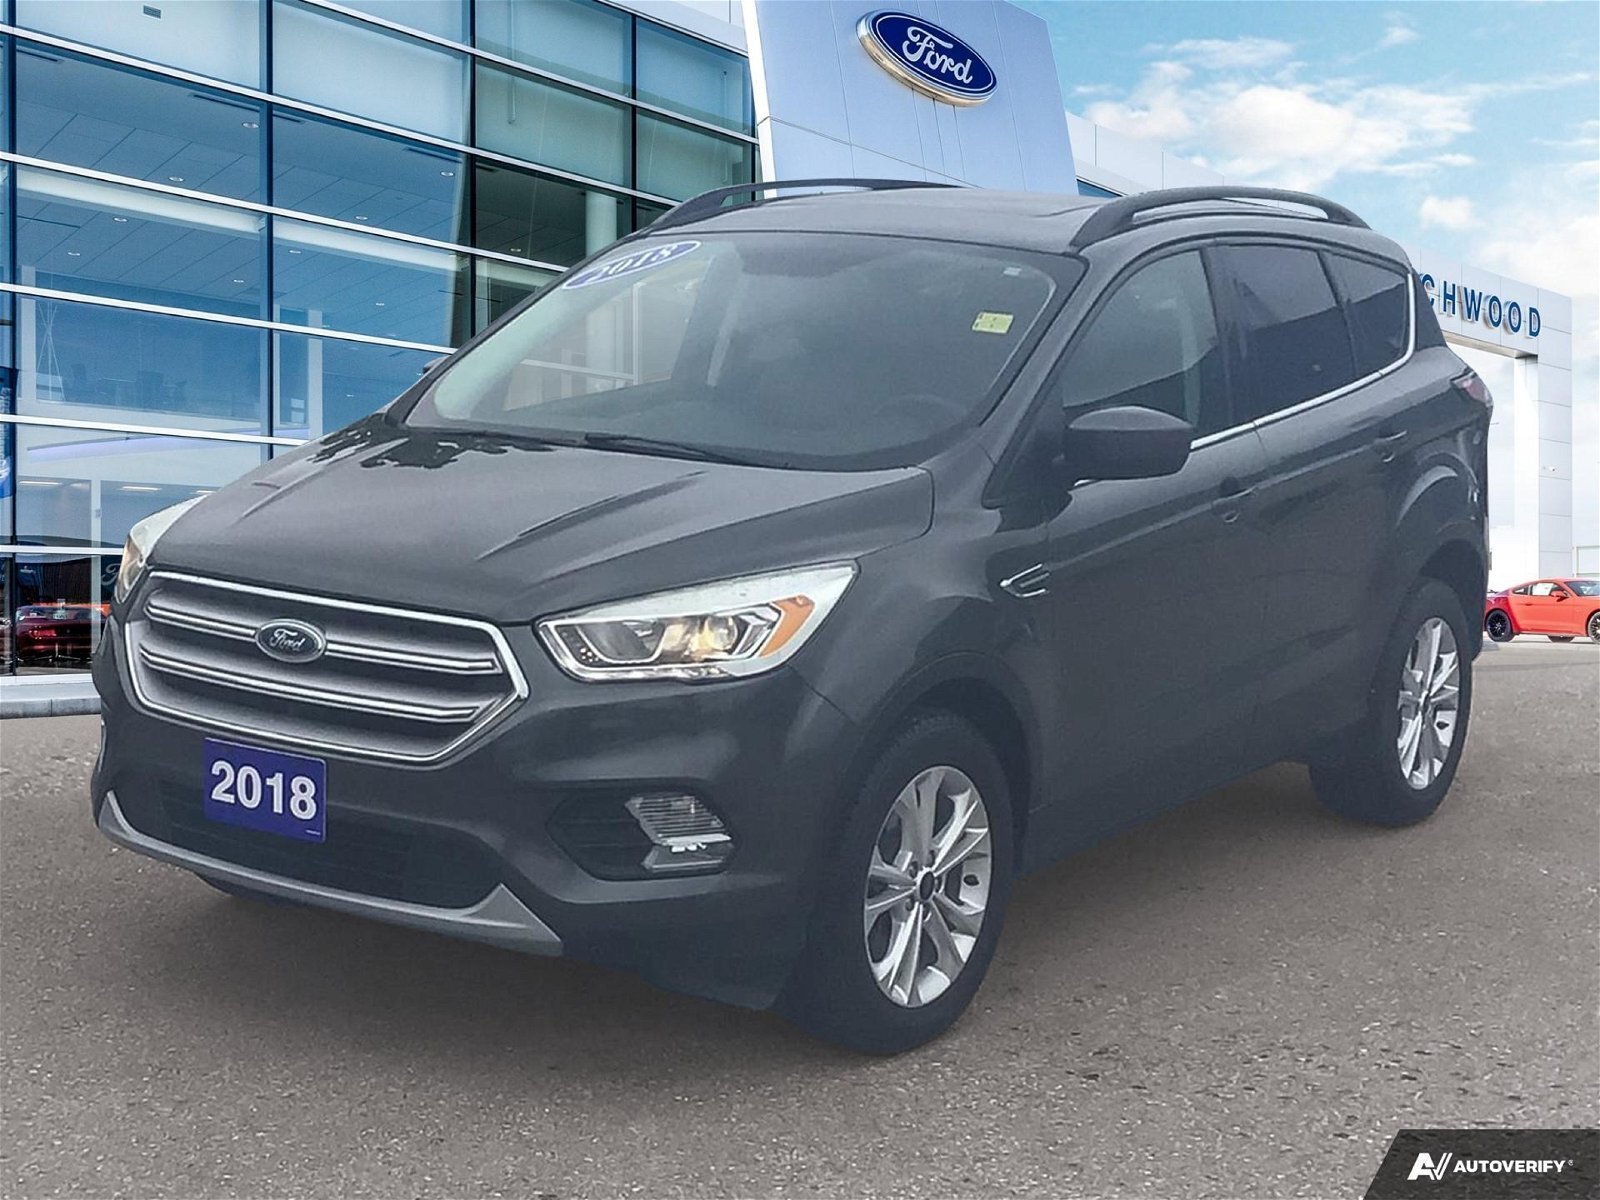 2018 Ford Escape SEL 4Wd | Accident Free | Candian Touring Pack